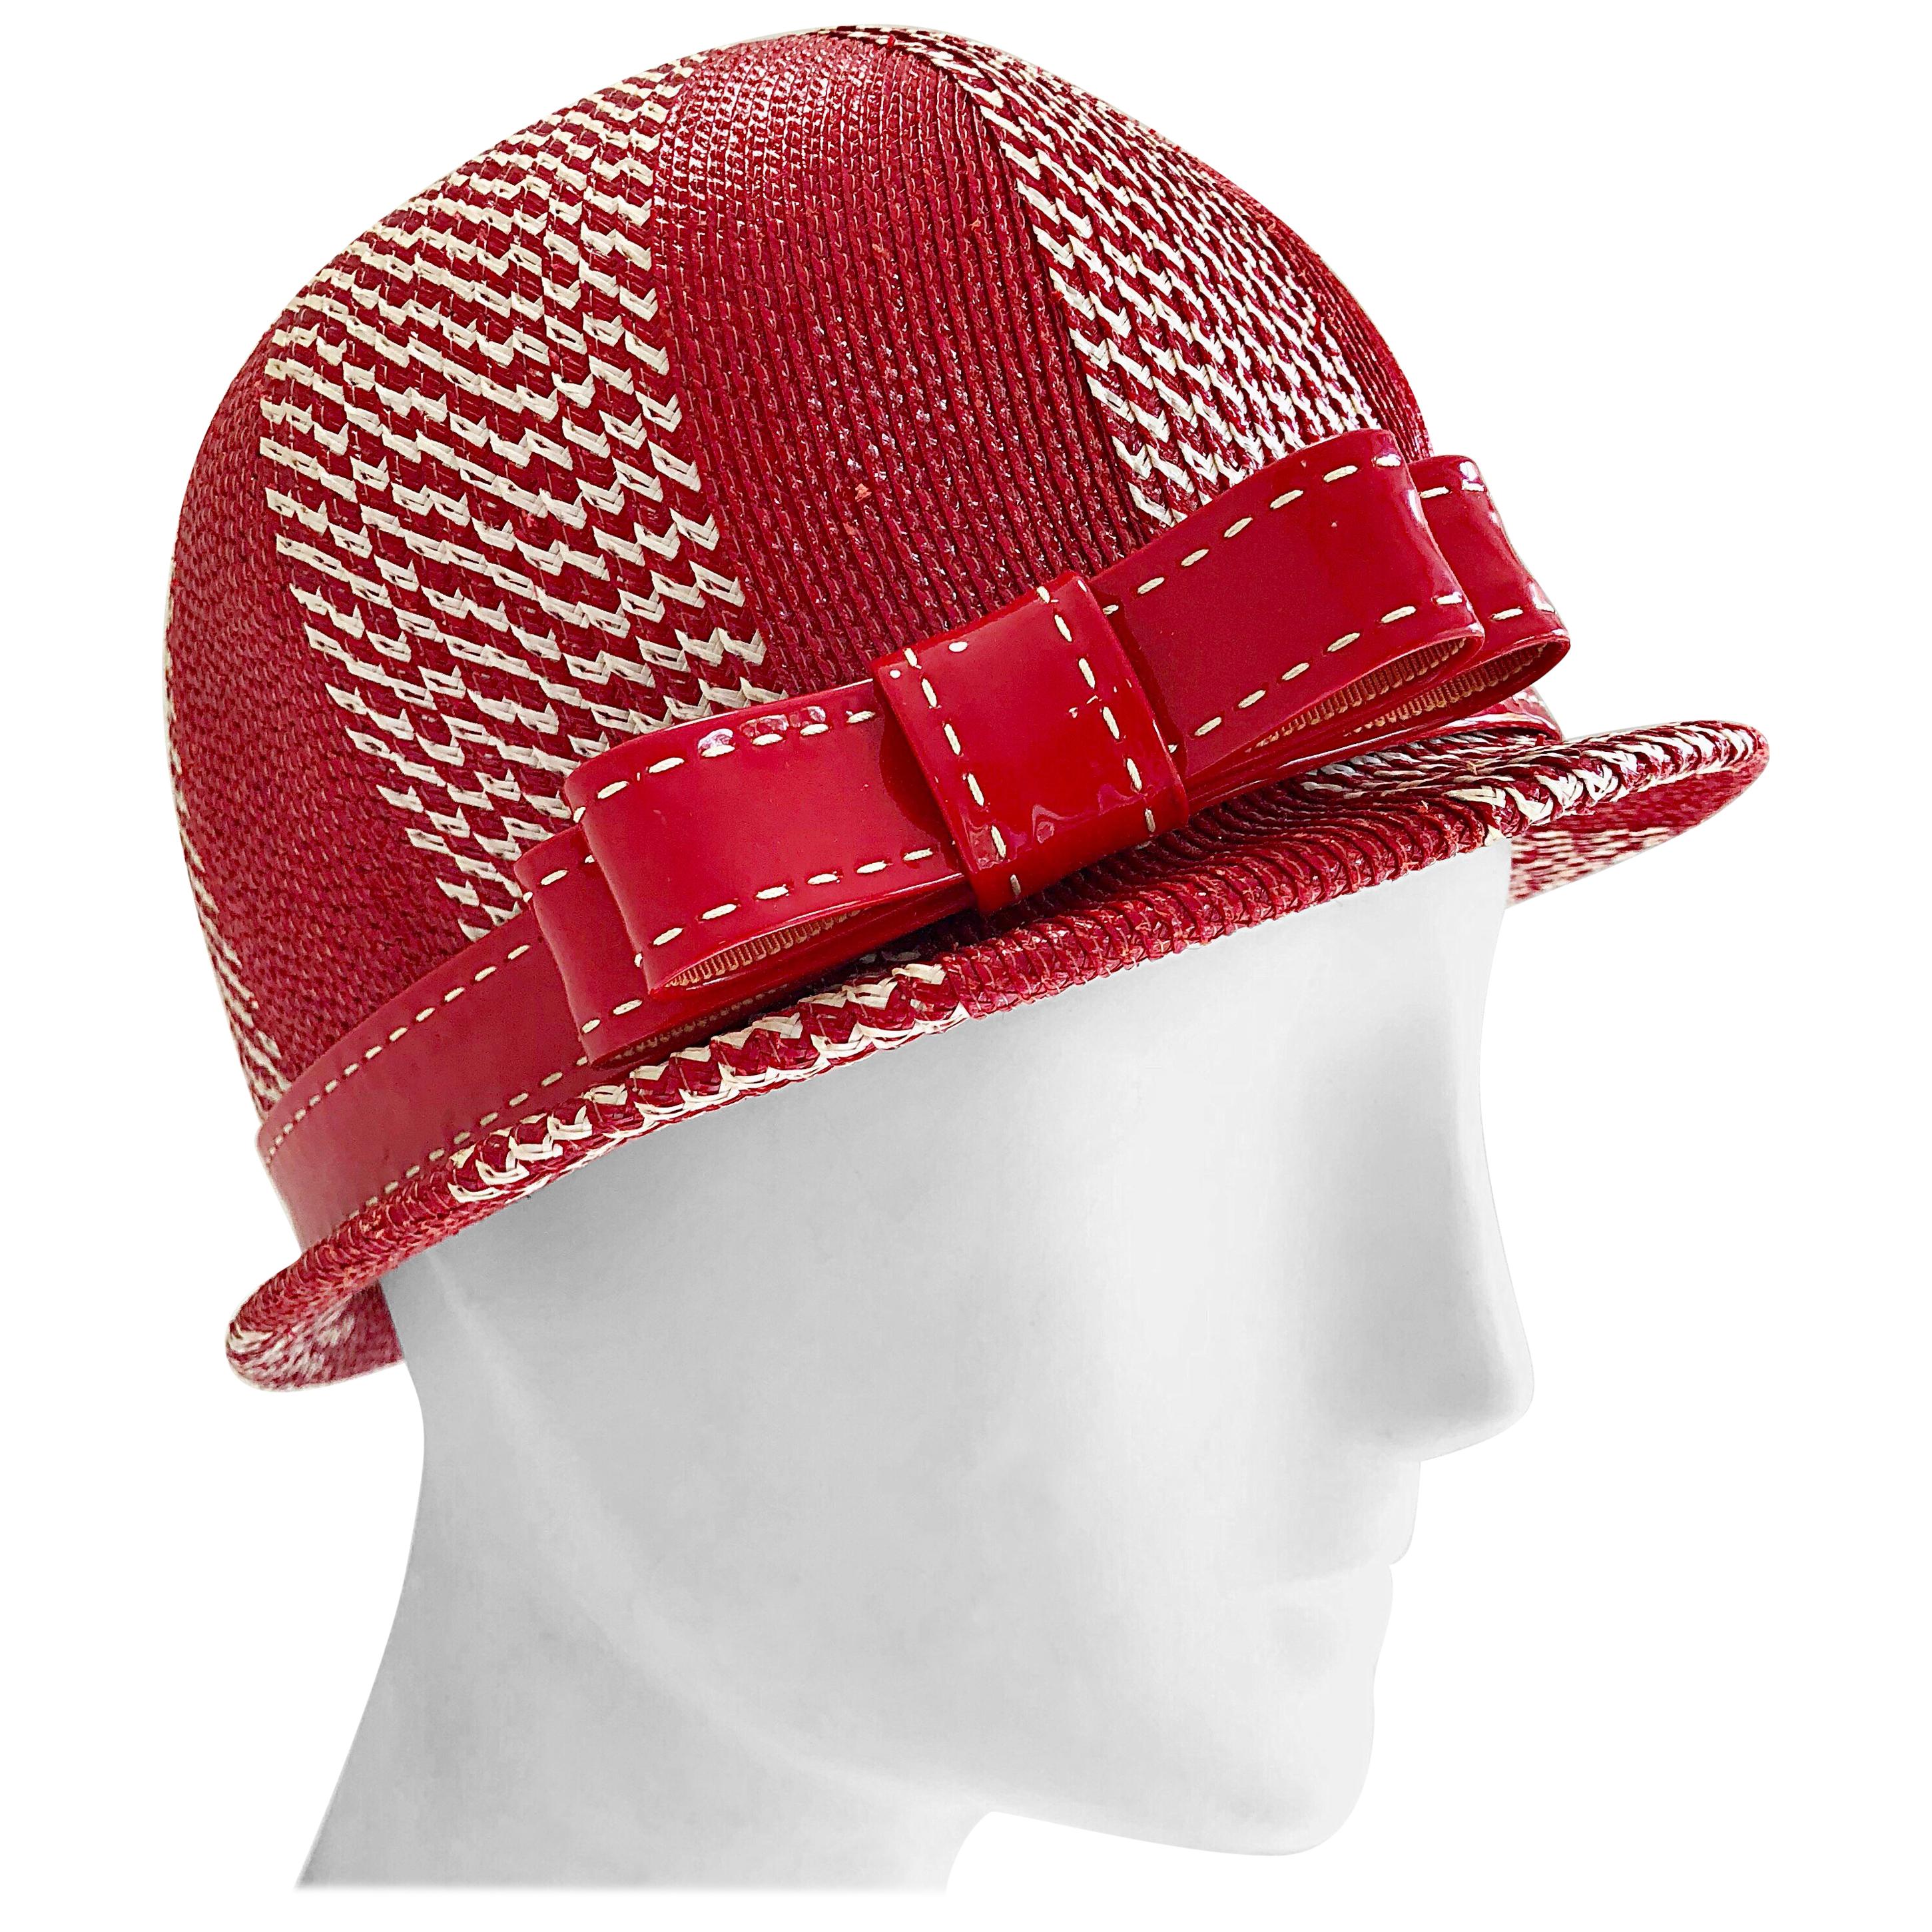 Chic 1960s Adele Claire Red + White Waxed Wicker Patent 60s Vintage Cloche Hat